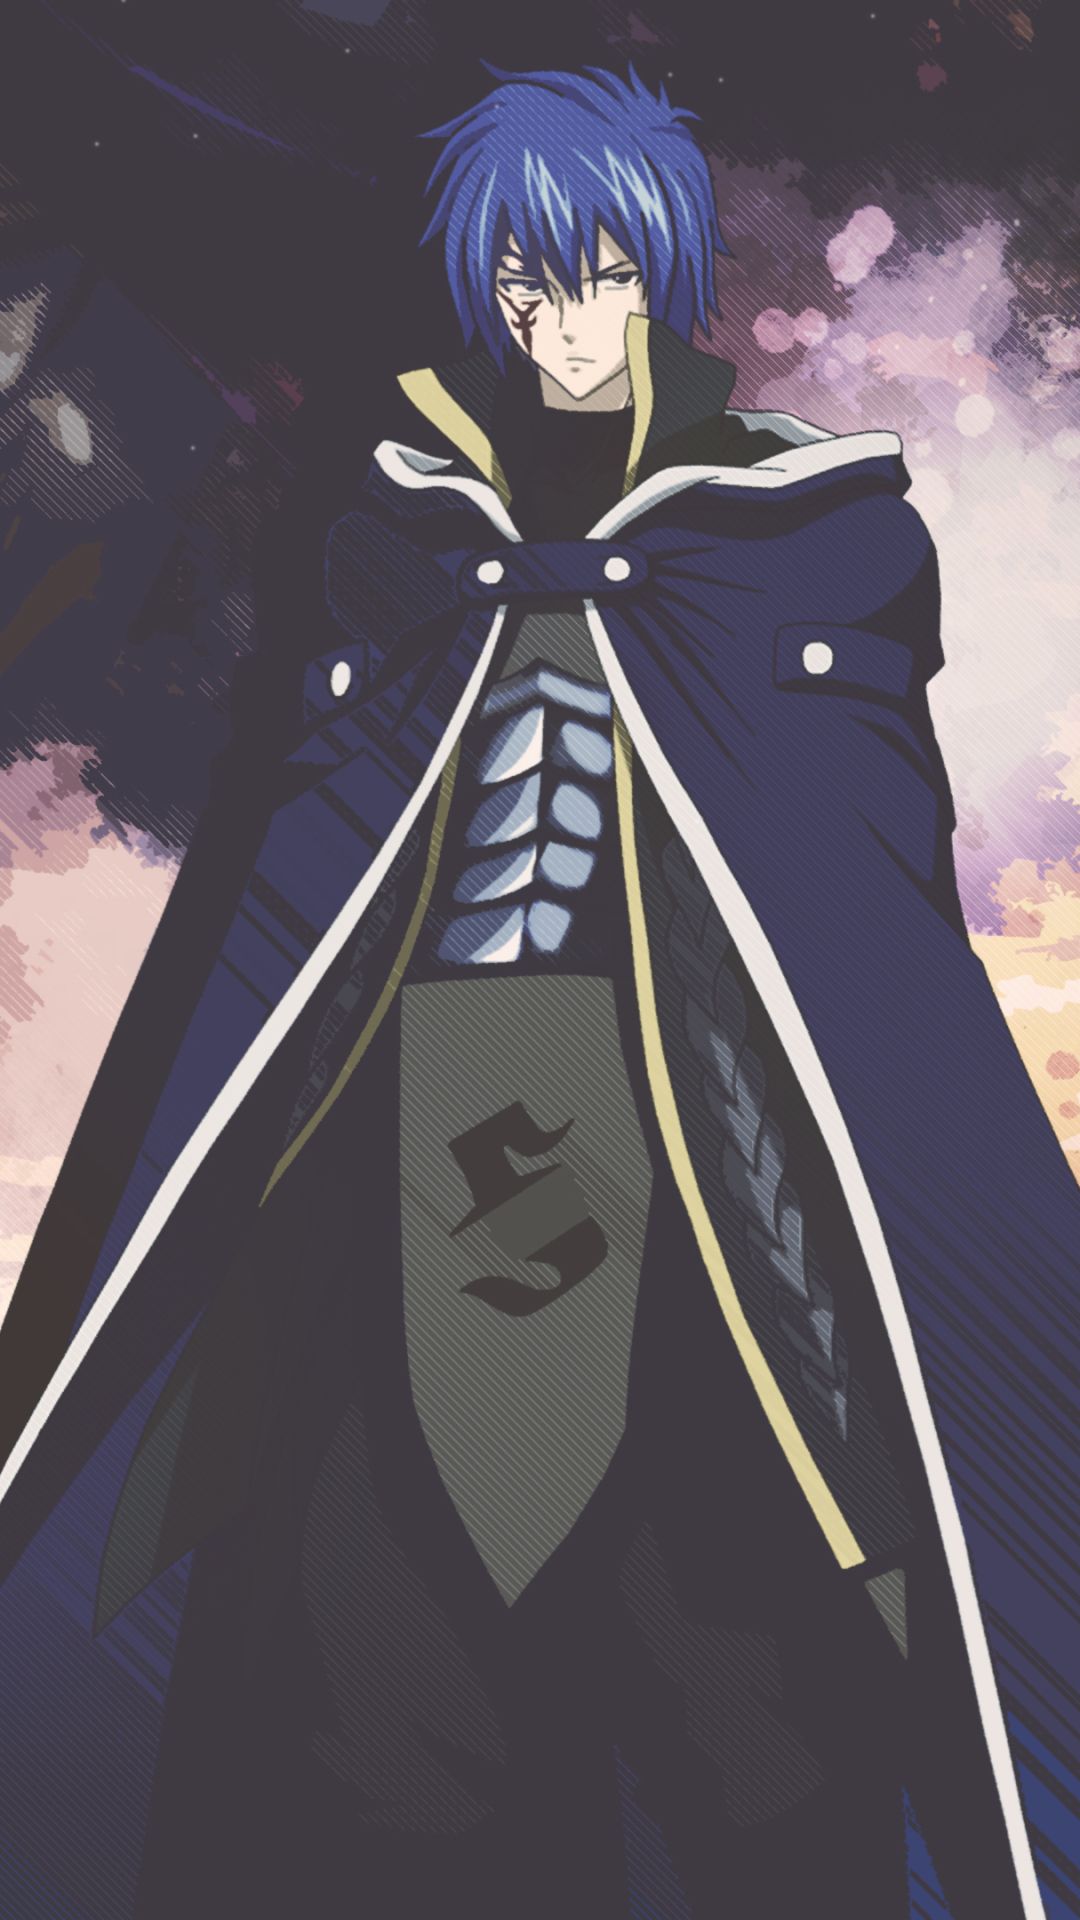 Fairy Tail Jellal Wallpapers